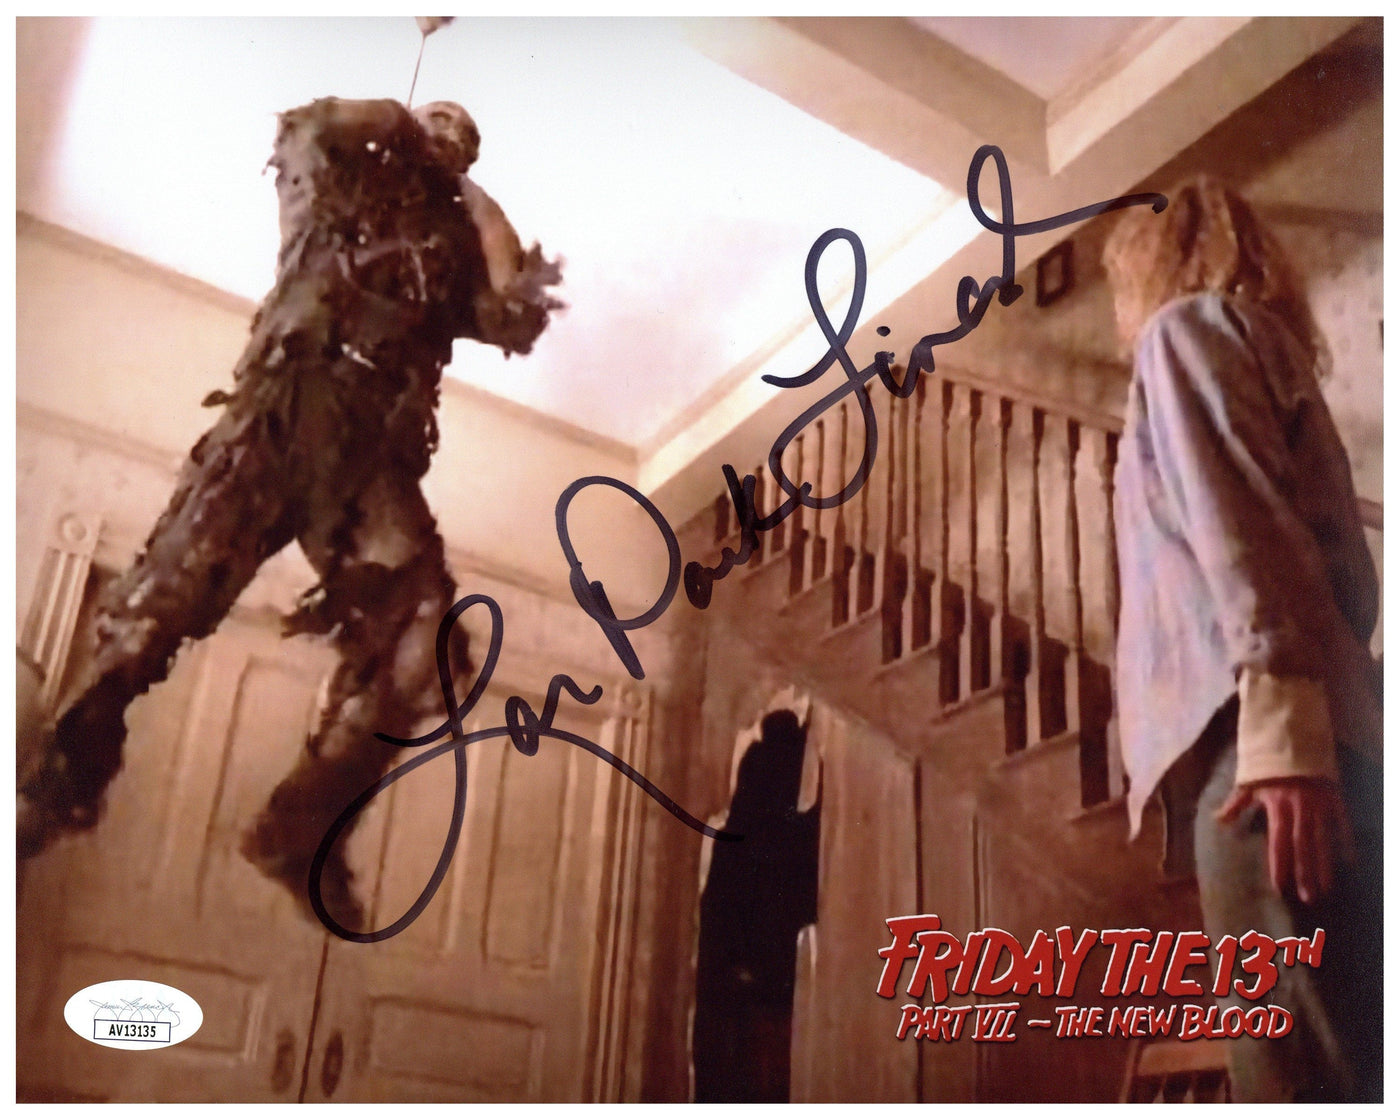 Lar Park Lincoln Signed 8x10 Photo Friday the 13th Part VII: The New Blood Autograph JSA